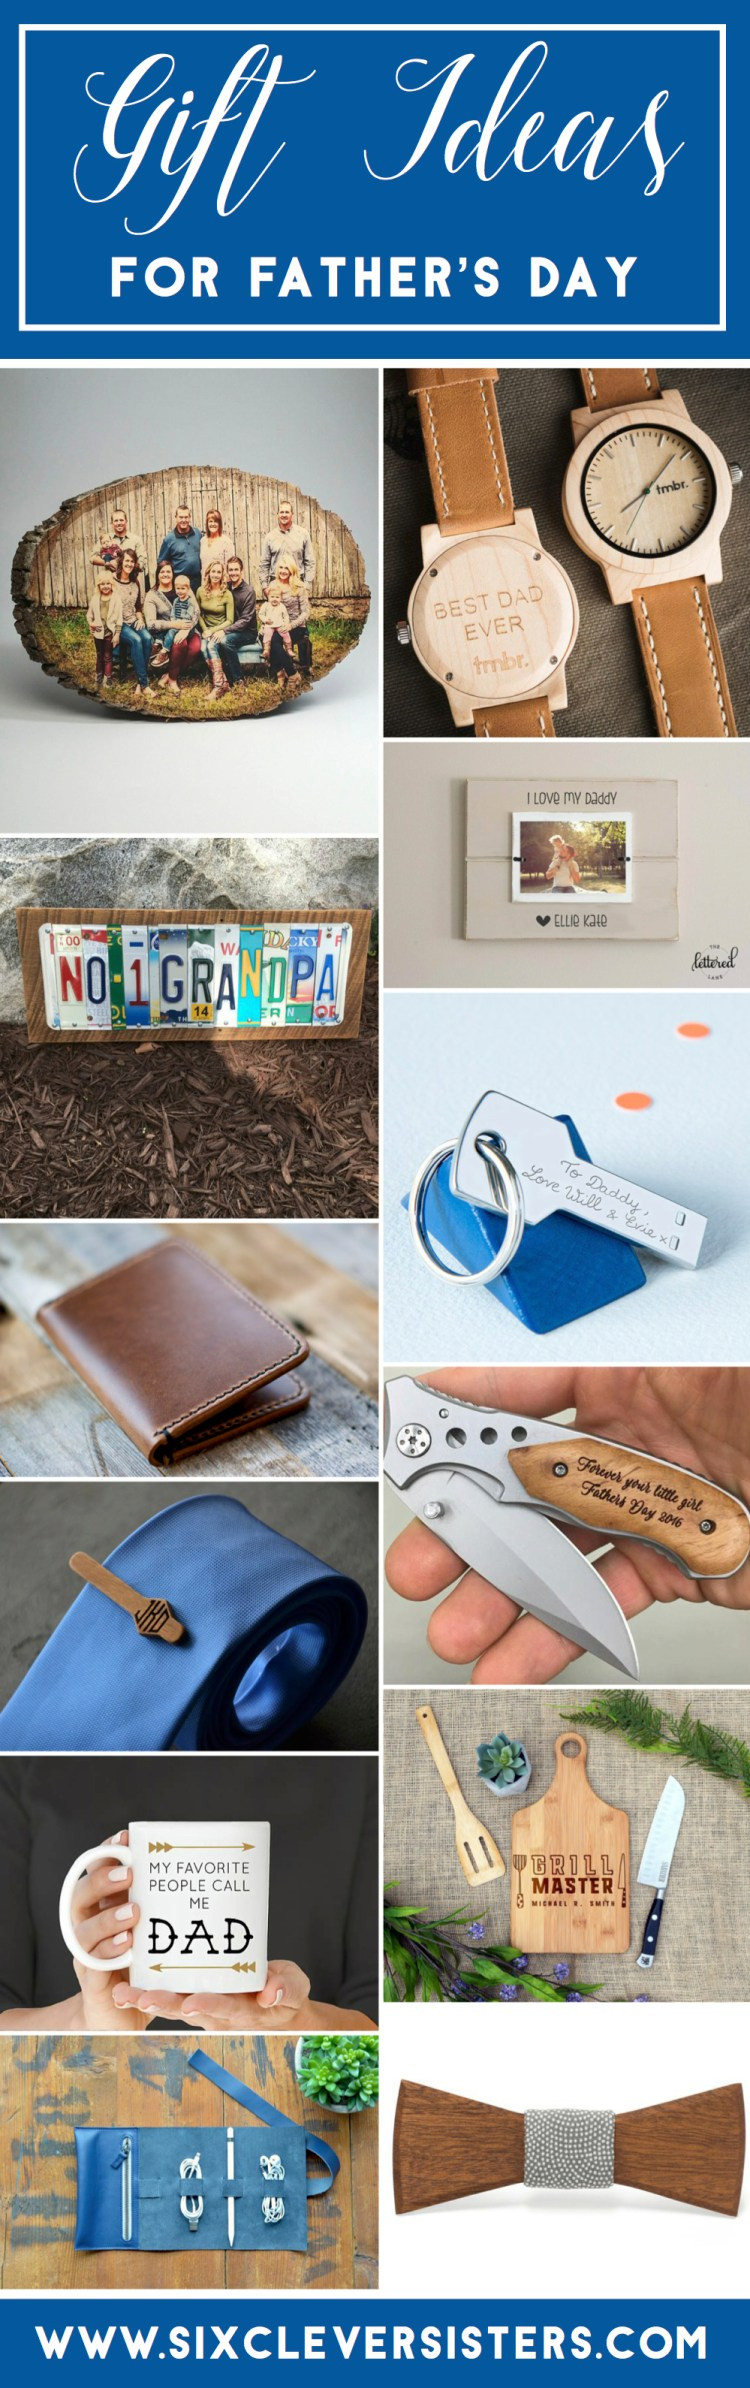 Cool Fathers Day Gift Ideas
 25 Great Father s Day Gift Ideas on Etsy that are amazing